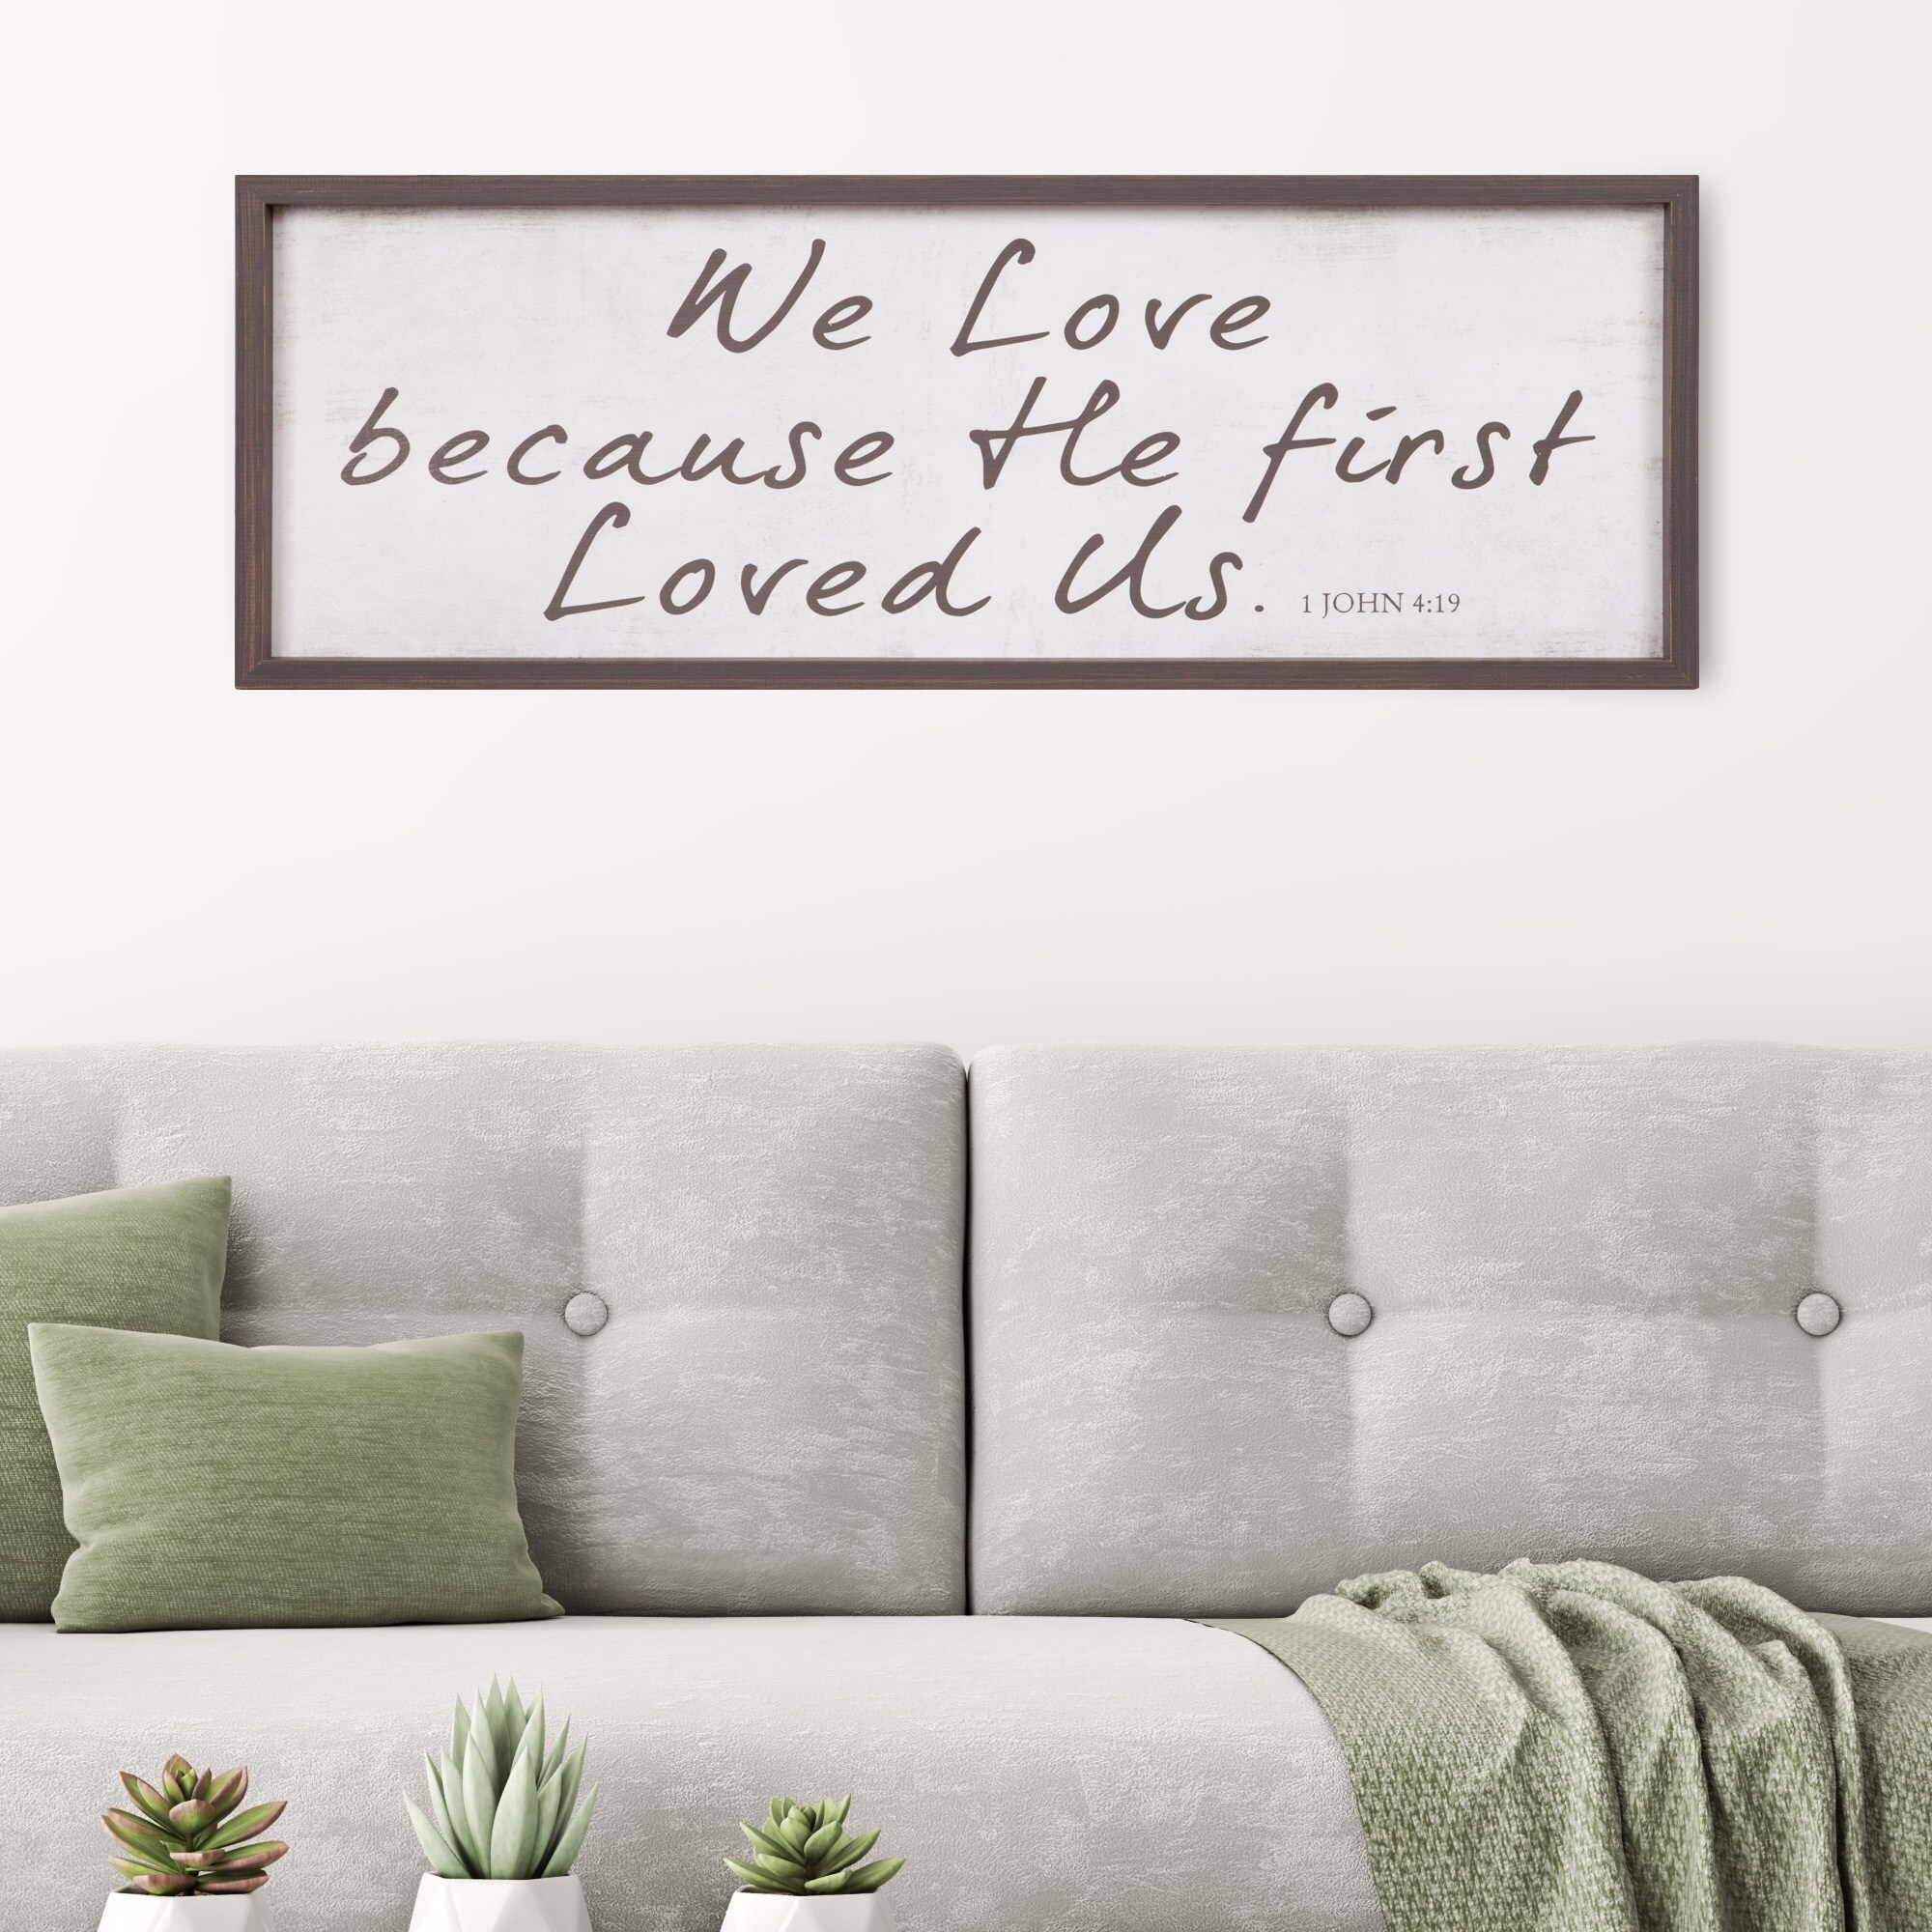 Shop Patton Wall Decor We Love Because He First Loved Us Bible Verse Rustic Wood Framed Wall Art Decor 12x36 White Overstock 24081446